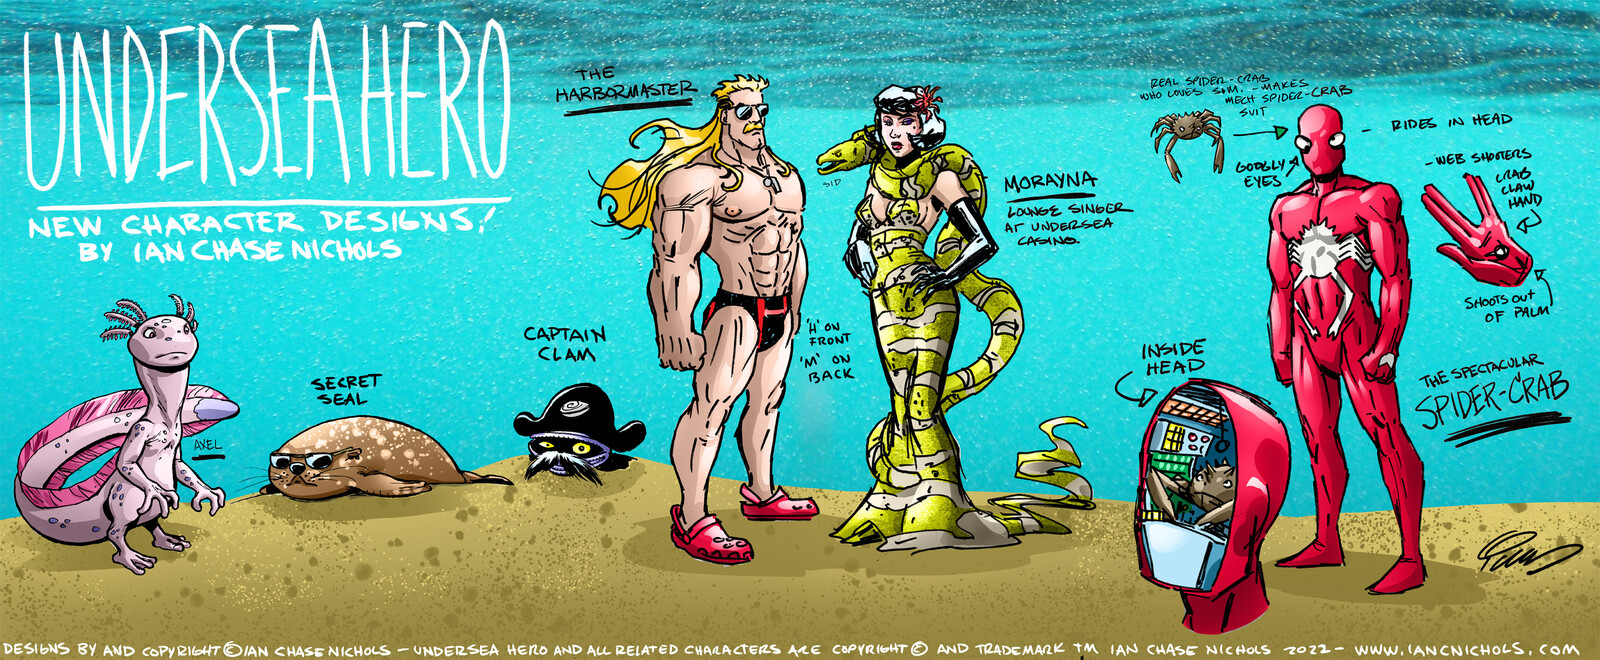 More New Undersea Hero Characters
UNDERSEA HERO and all Related Characters are Copyright © and Trademark TM 2022 Ian Chase Nichols. All Rights Reserved.
